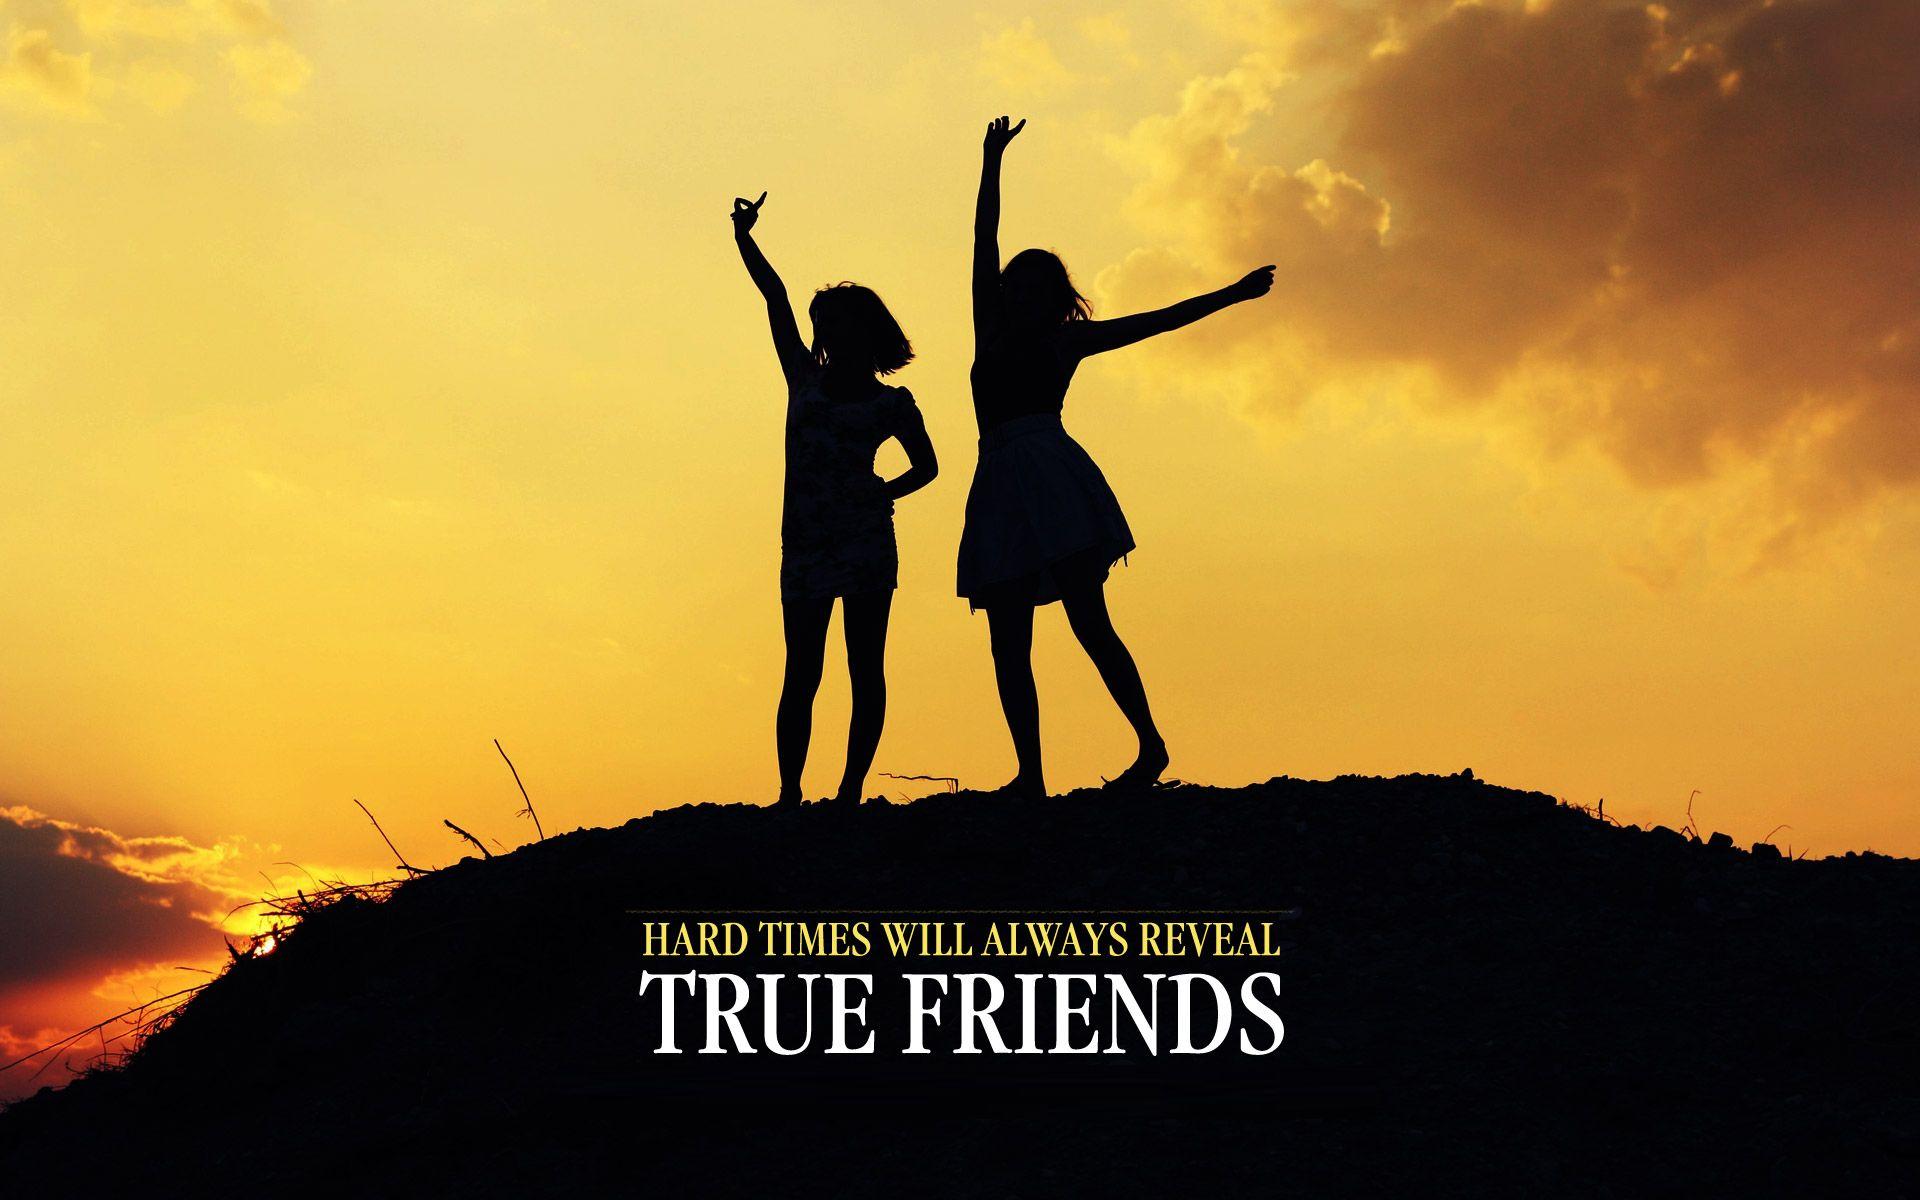 Happy Friendship Day 2016 Image HD 3D Wallpaper Free Download